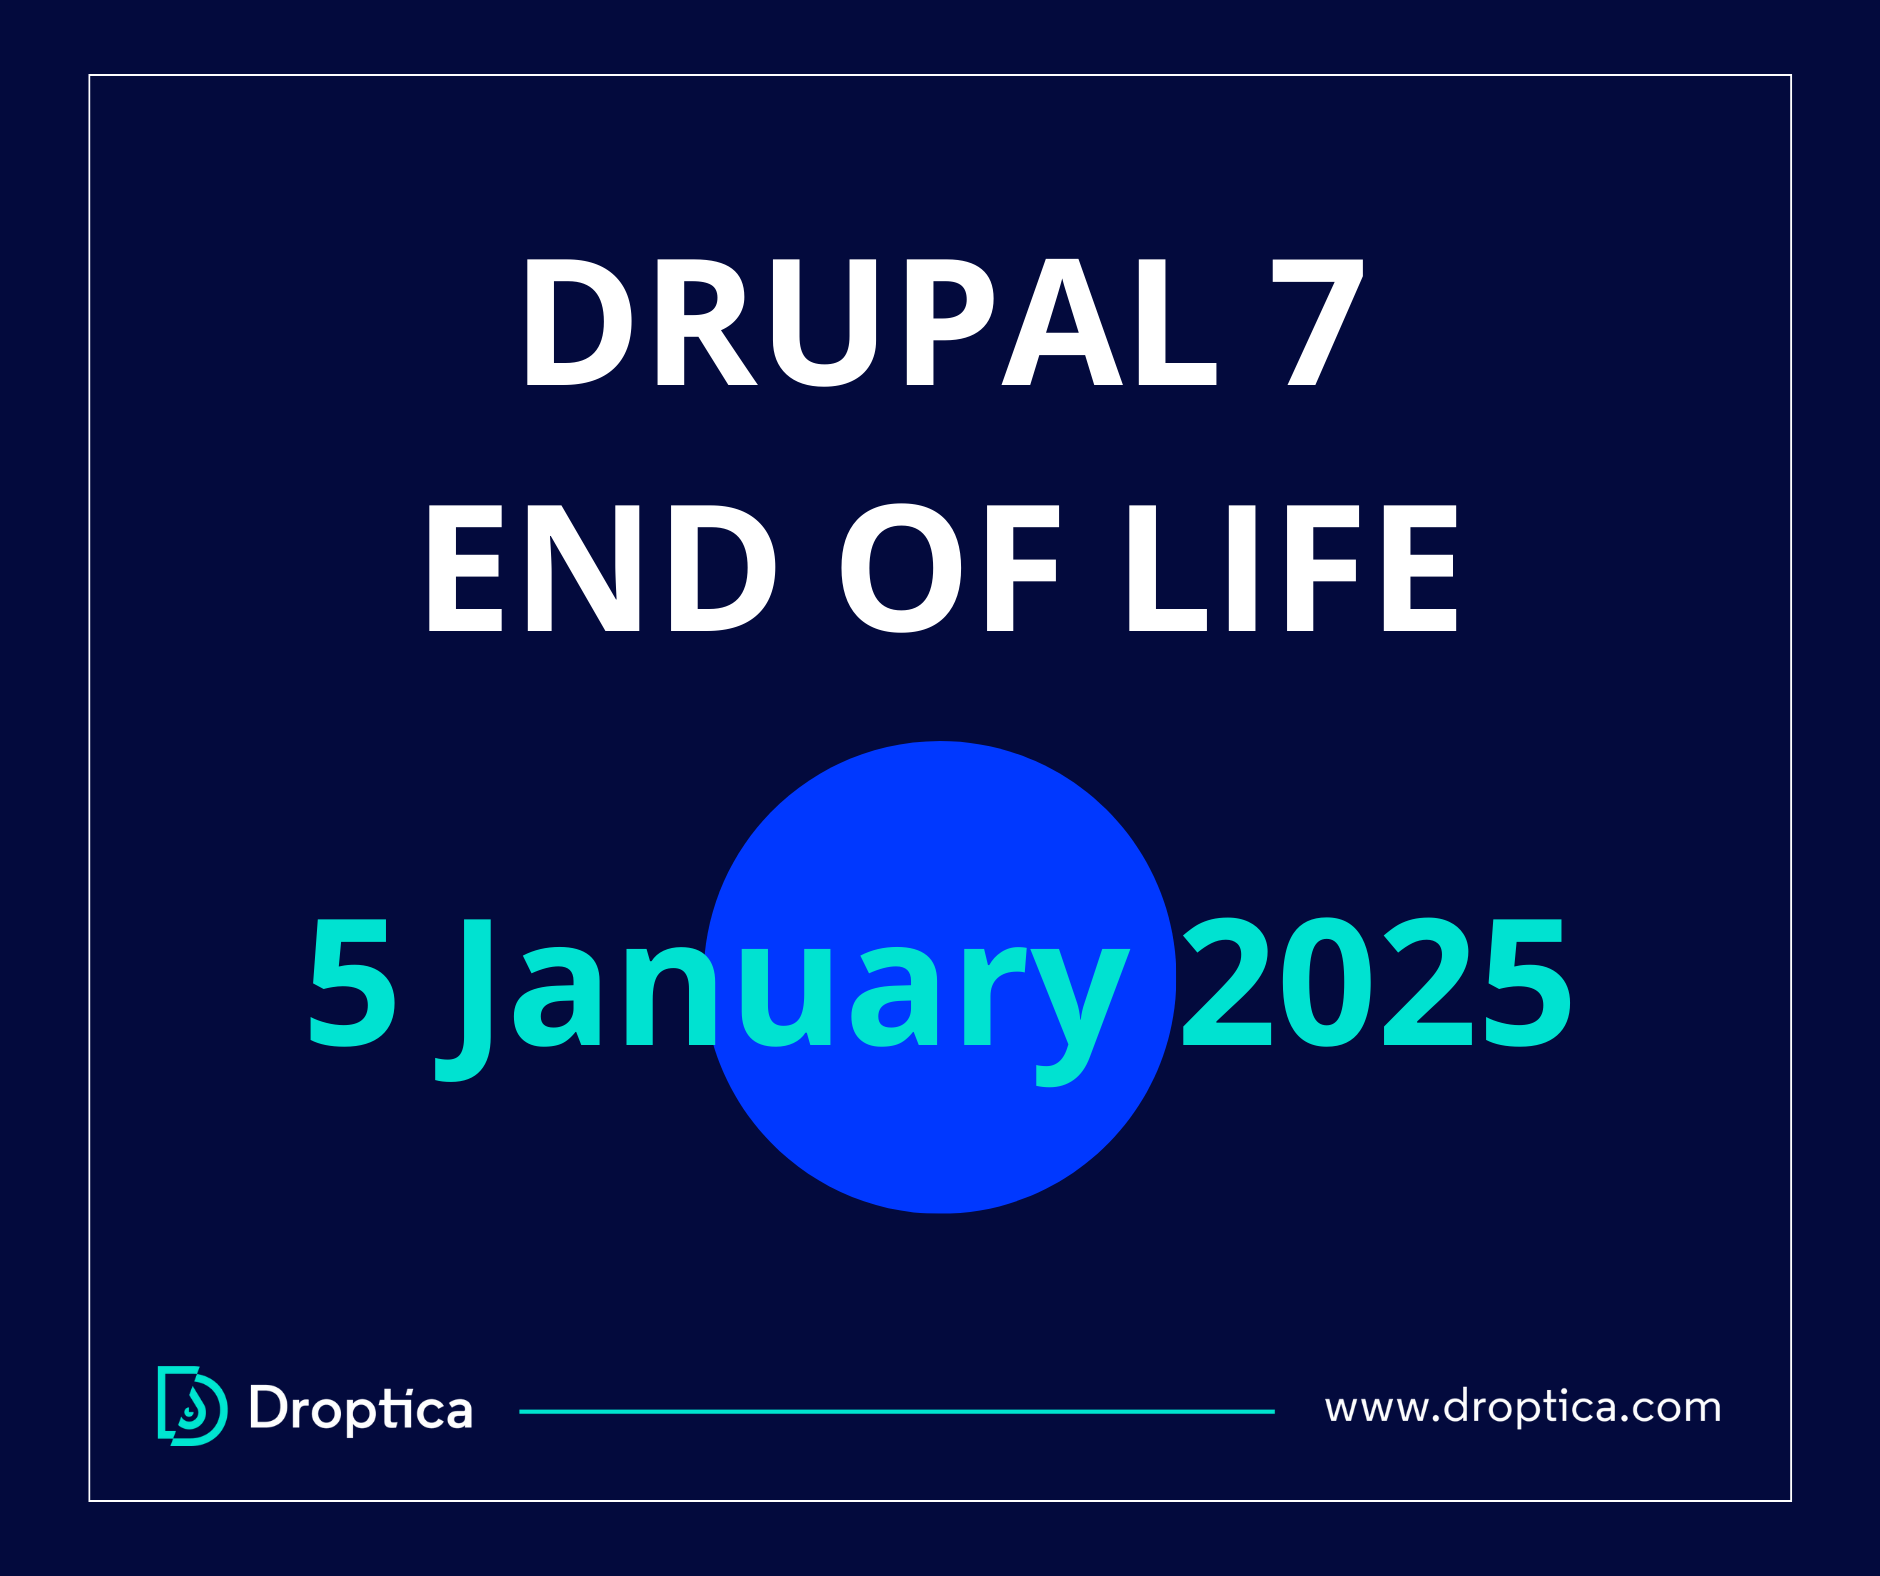 The new date of Drupal 7 end of life was established for 5 January 2025 by the Drupal team.